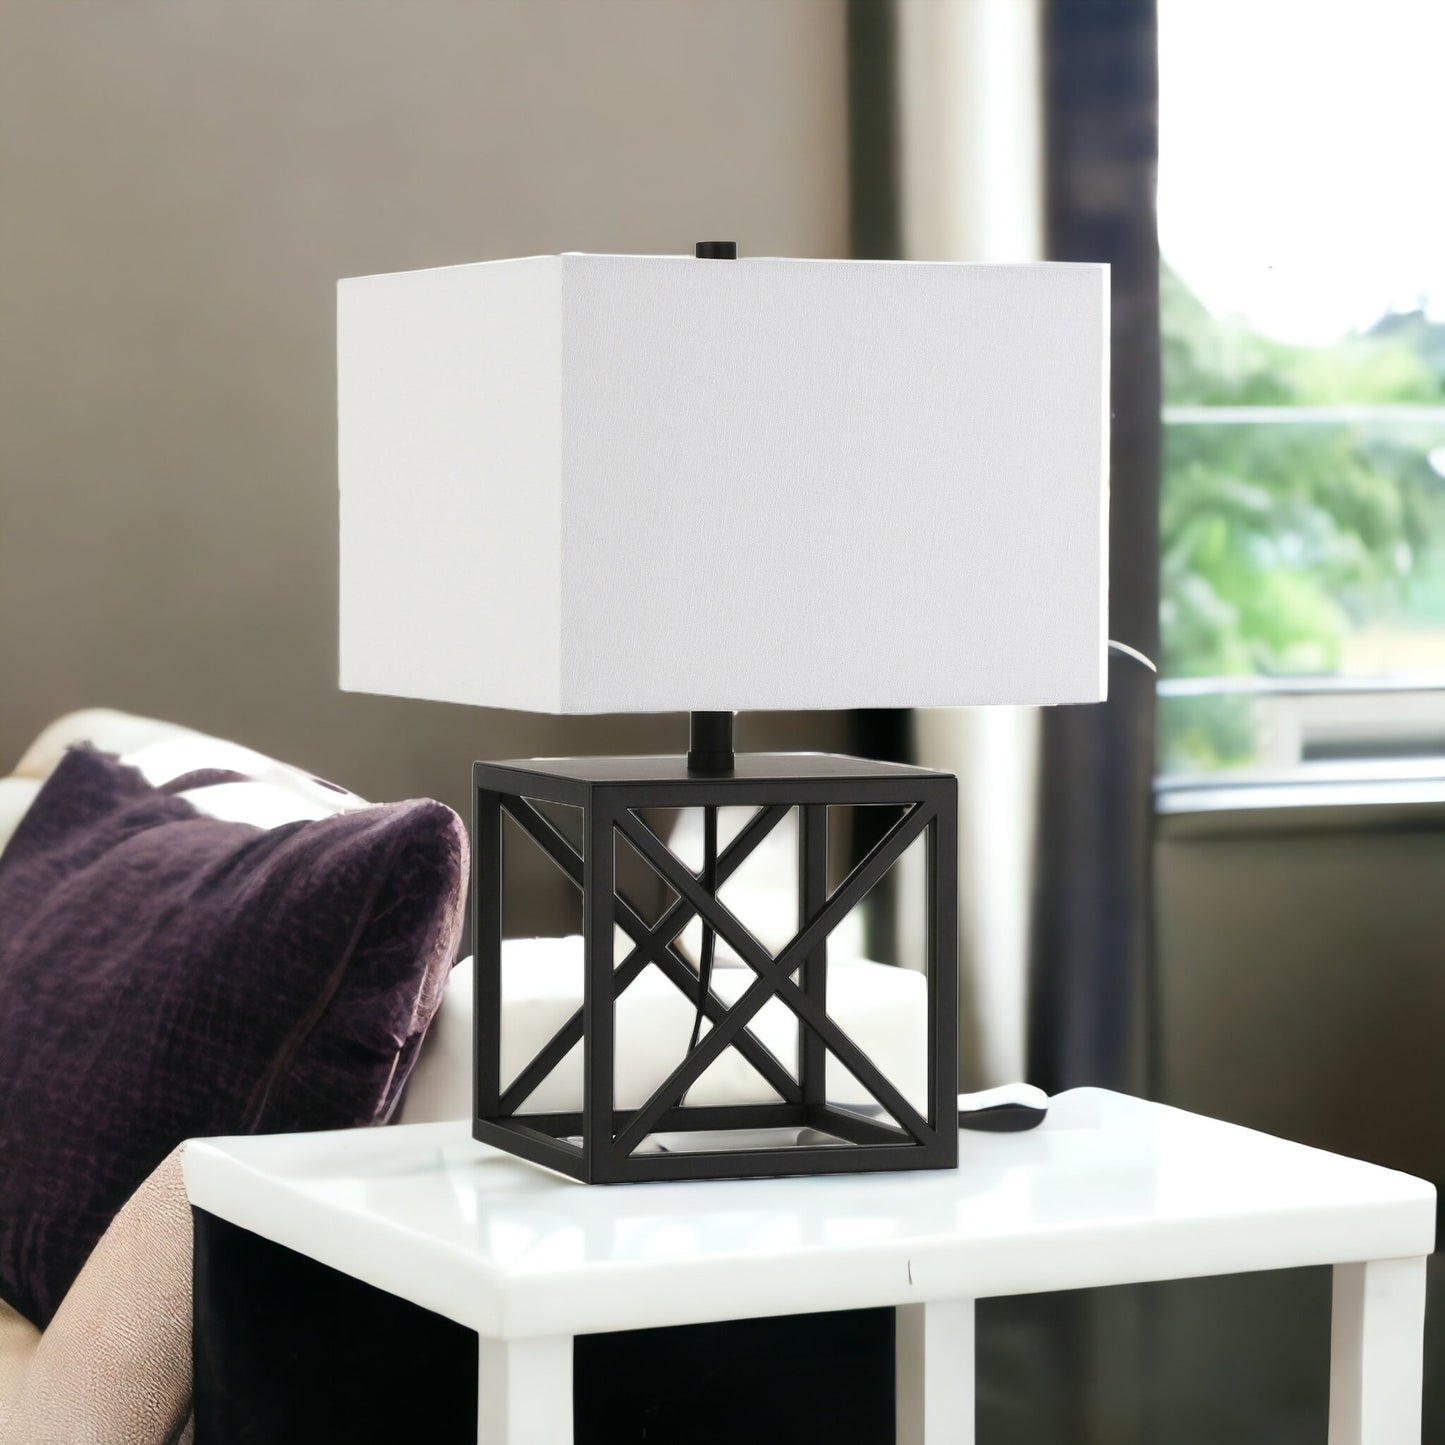 19" Black Metal Table Lamp With White Square Shade